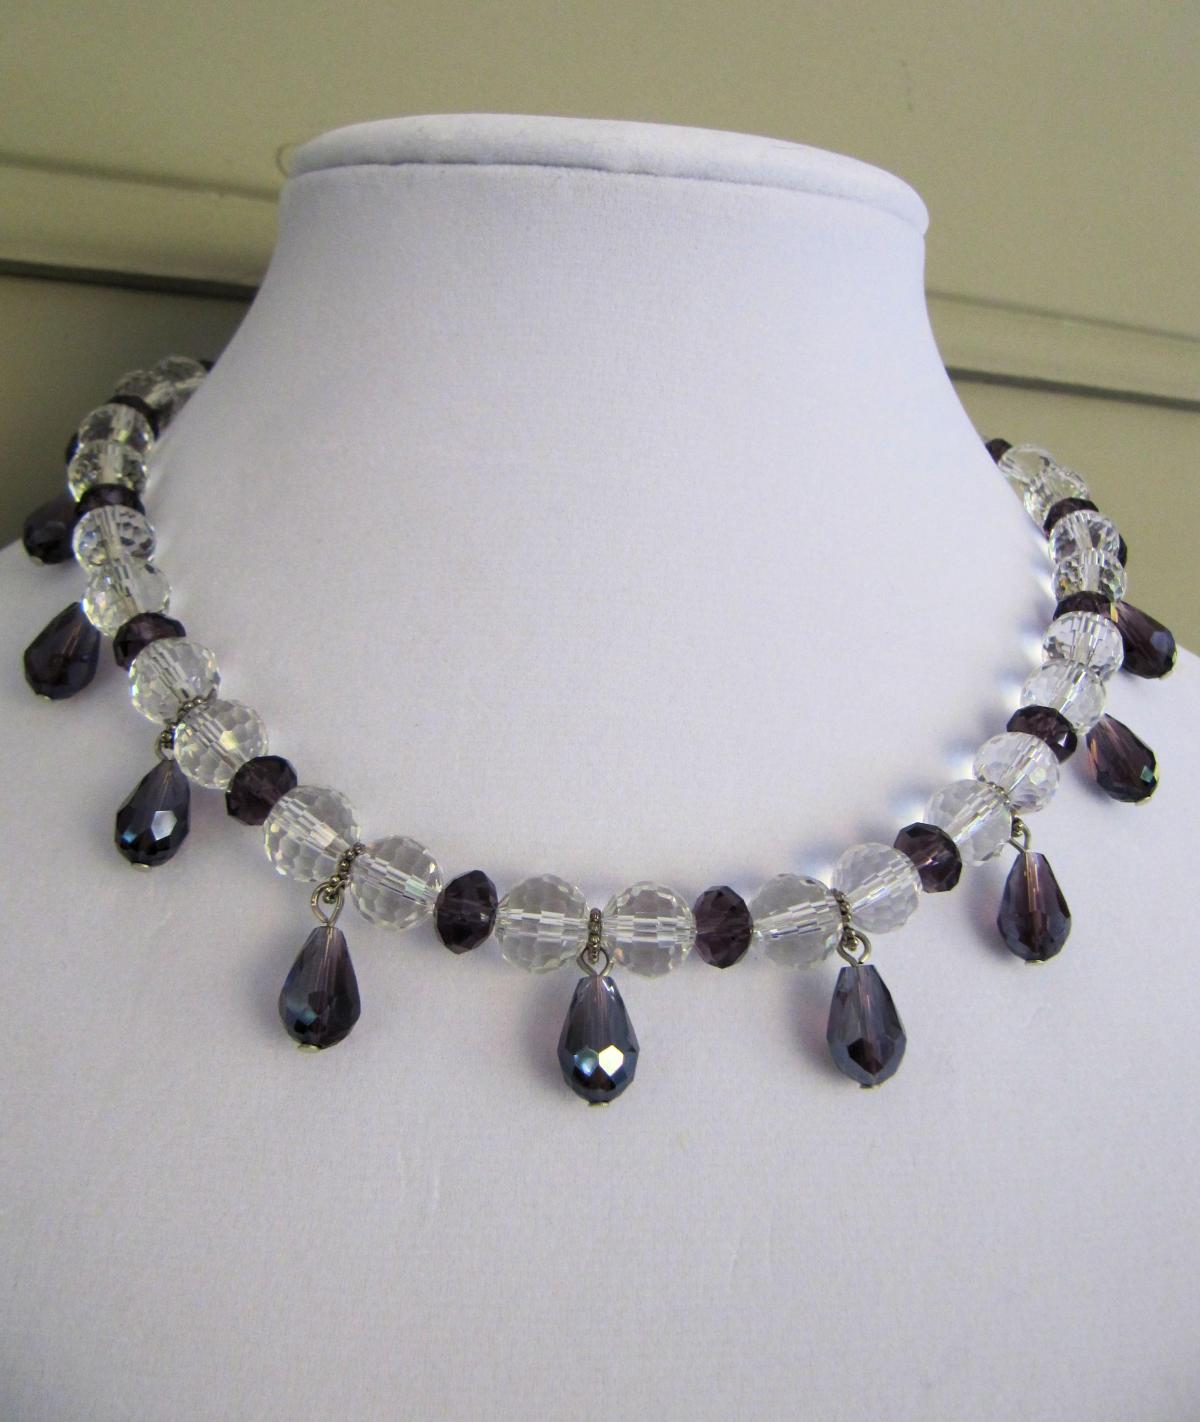 Stunning Cut Crystal Beaded Necklace With Amethyst Faceted Tear Drop Dangles With Silver Accents